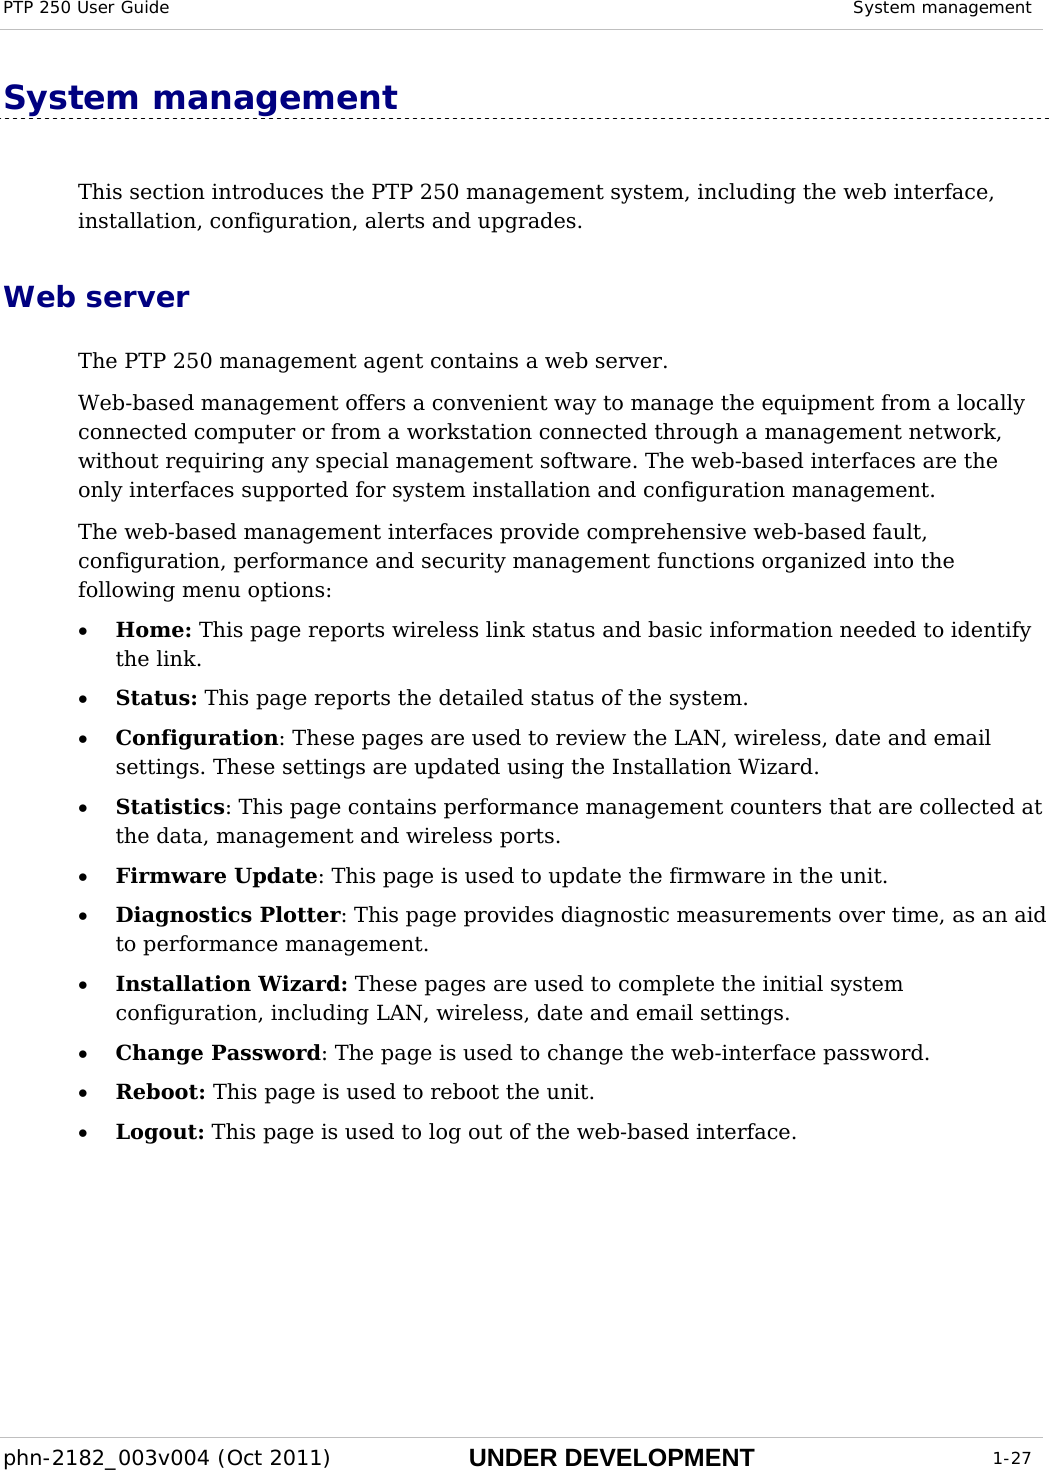 PTP 250 User Guide  System management  phn-2182_003v004 (Oct 2011)  UNDER DEVELOPMENT  1-27  System management  This section introduces the PTP 250 management system, including the web interface, installation, configuration, alerts and upgrades. Web server The PTP 250 management agent contains a web server. Web-based management offers a convenient way to manage the equipment from a locally connected computer or from a workstation connected through a management network, without requiring any special management software. The web-based interfaces are the only interfaces supported for system installation and configuration management. The web-based management interfaces provide comprehensive web-based fault, configuration, performance and security management functions organized into the following menu options: • Home: This page reports wireless link status and basic information needed to identify the link. • Status: This page reports the detailed status of the system. • Configuration: These pages are used to review the LAN, wireless, date and email settings. These settings are updated using the Installation Wizard. • Statistics: This page contains performance management counters that are collected at the data, management and wireless ports. • Firmware Update: This page is used to update the firmware in the unit. • Diagnostics Plotter: This page provides diagnostic measurements over time, as an aid to performance management. • Installation Wizard: These pages are used to complete the initial system  configuration, including LAN, wireless, date and email settings. • Change Password: The page is used to change the web-interface password. • Reboot: This page is used to reboot the unit. • Logout: This page is used to log out of the web-based interface. 